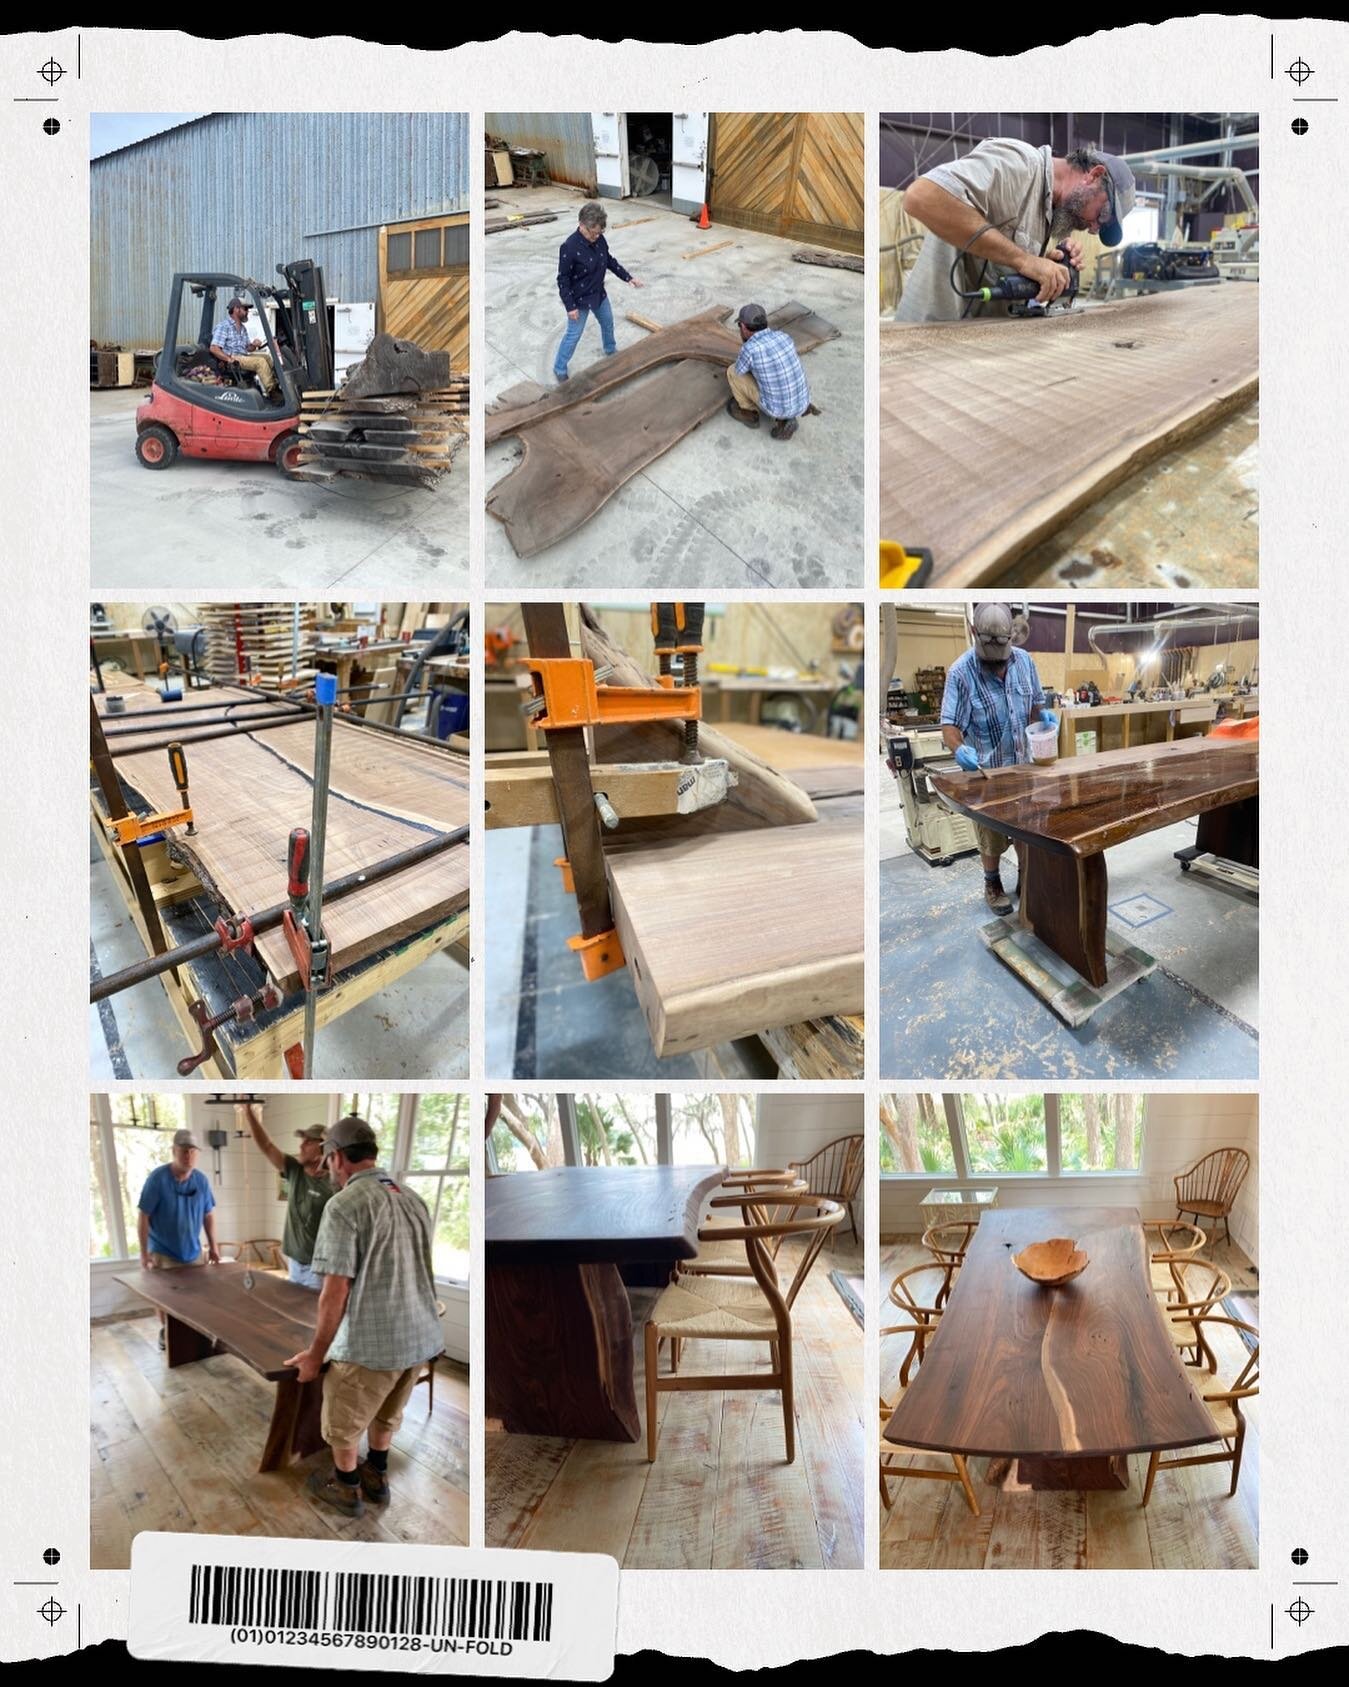 Let us take you on a furniture making journey! 

The story behind the making of this piece is quite remarkable. 

The journey began when we were contacted to bring our mobile mill to salvage a Black Walnut that had been damaged during a storm.  The t